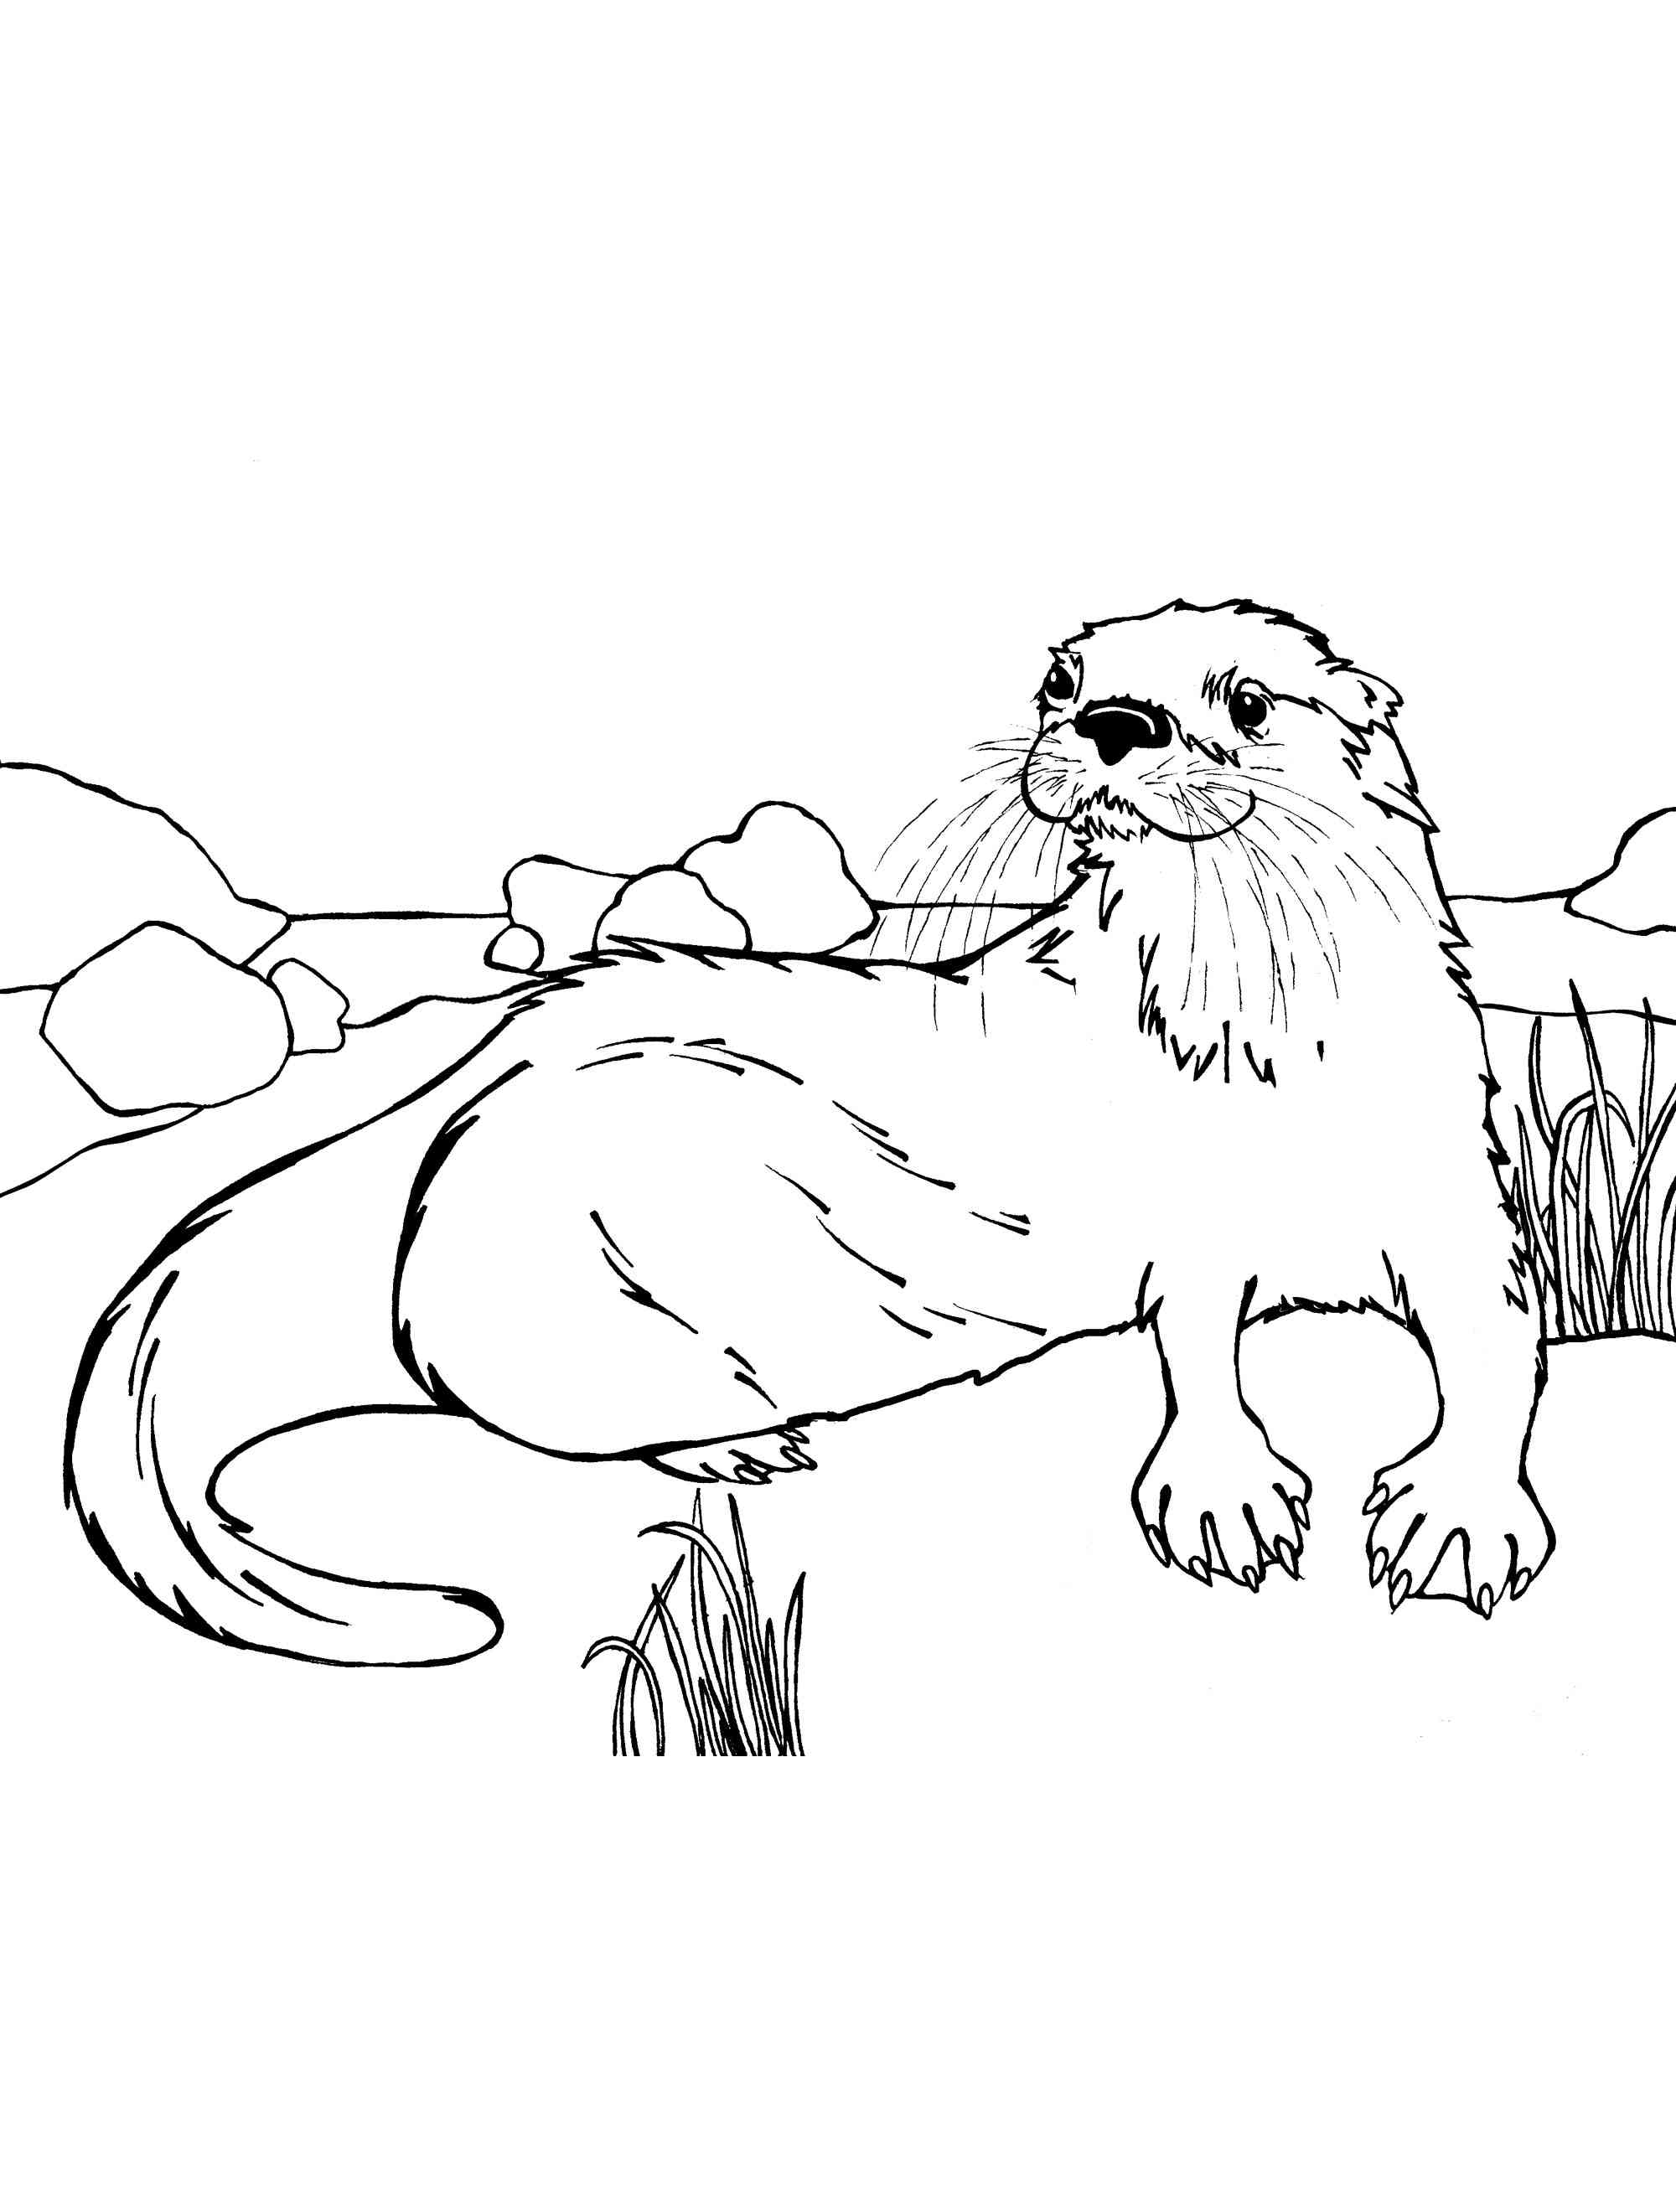 Sea Otter coloring page